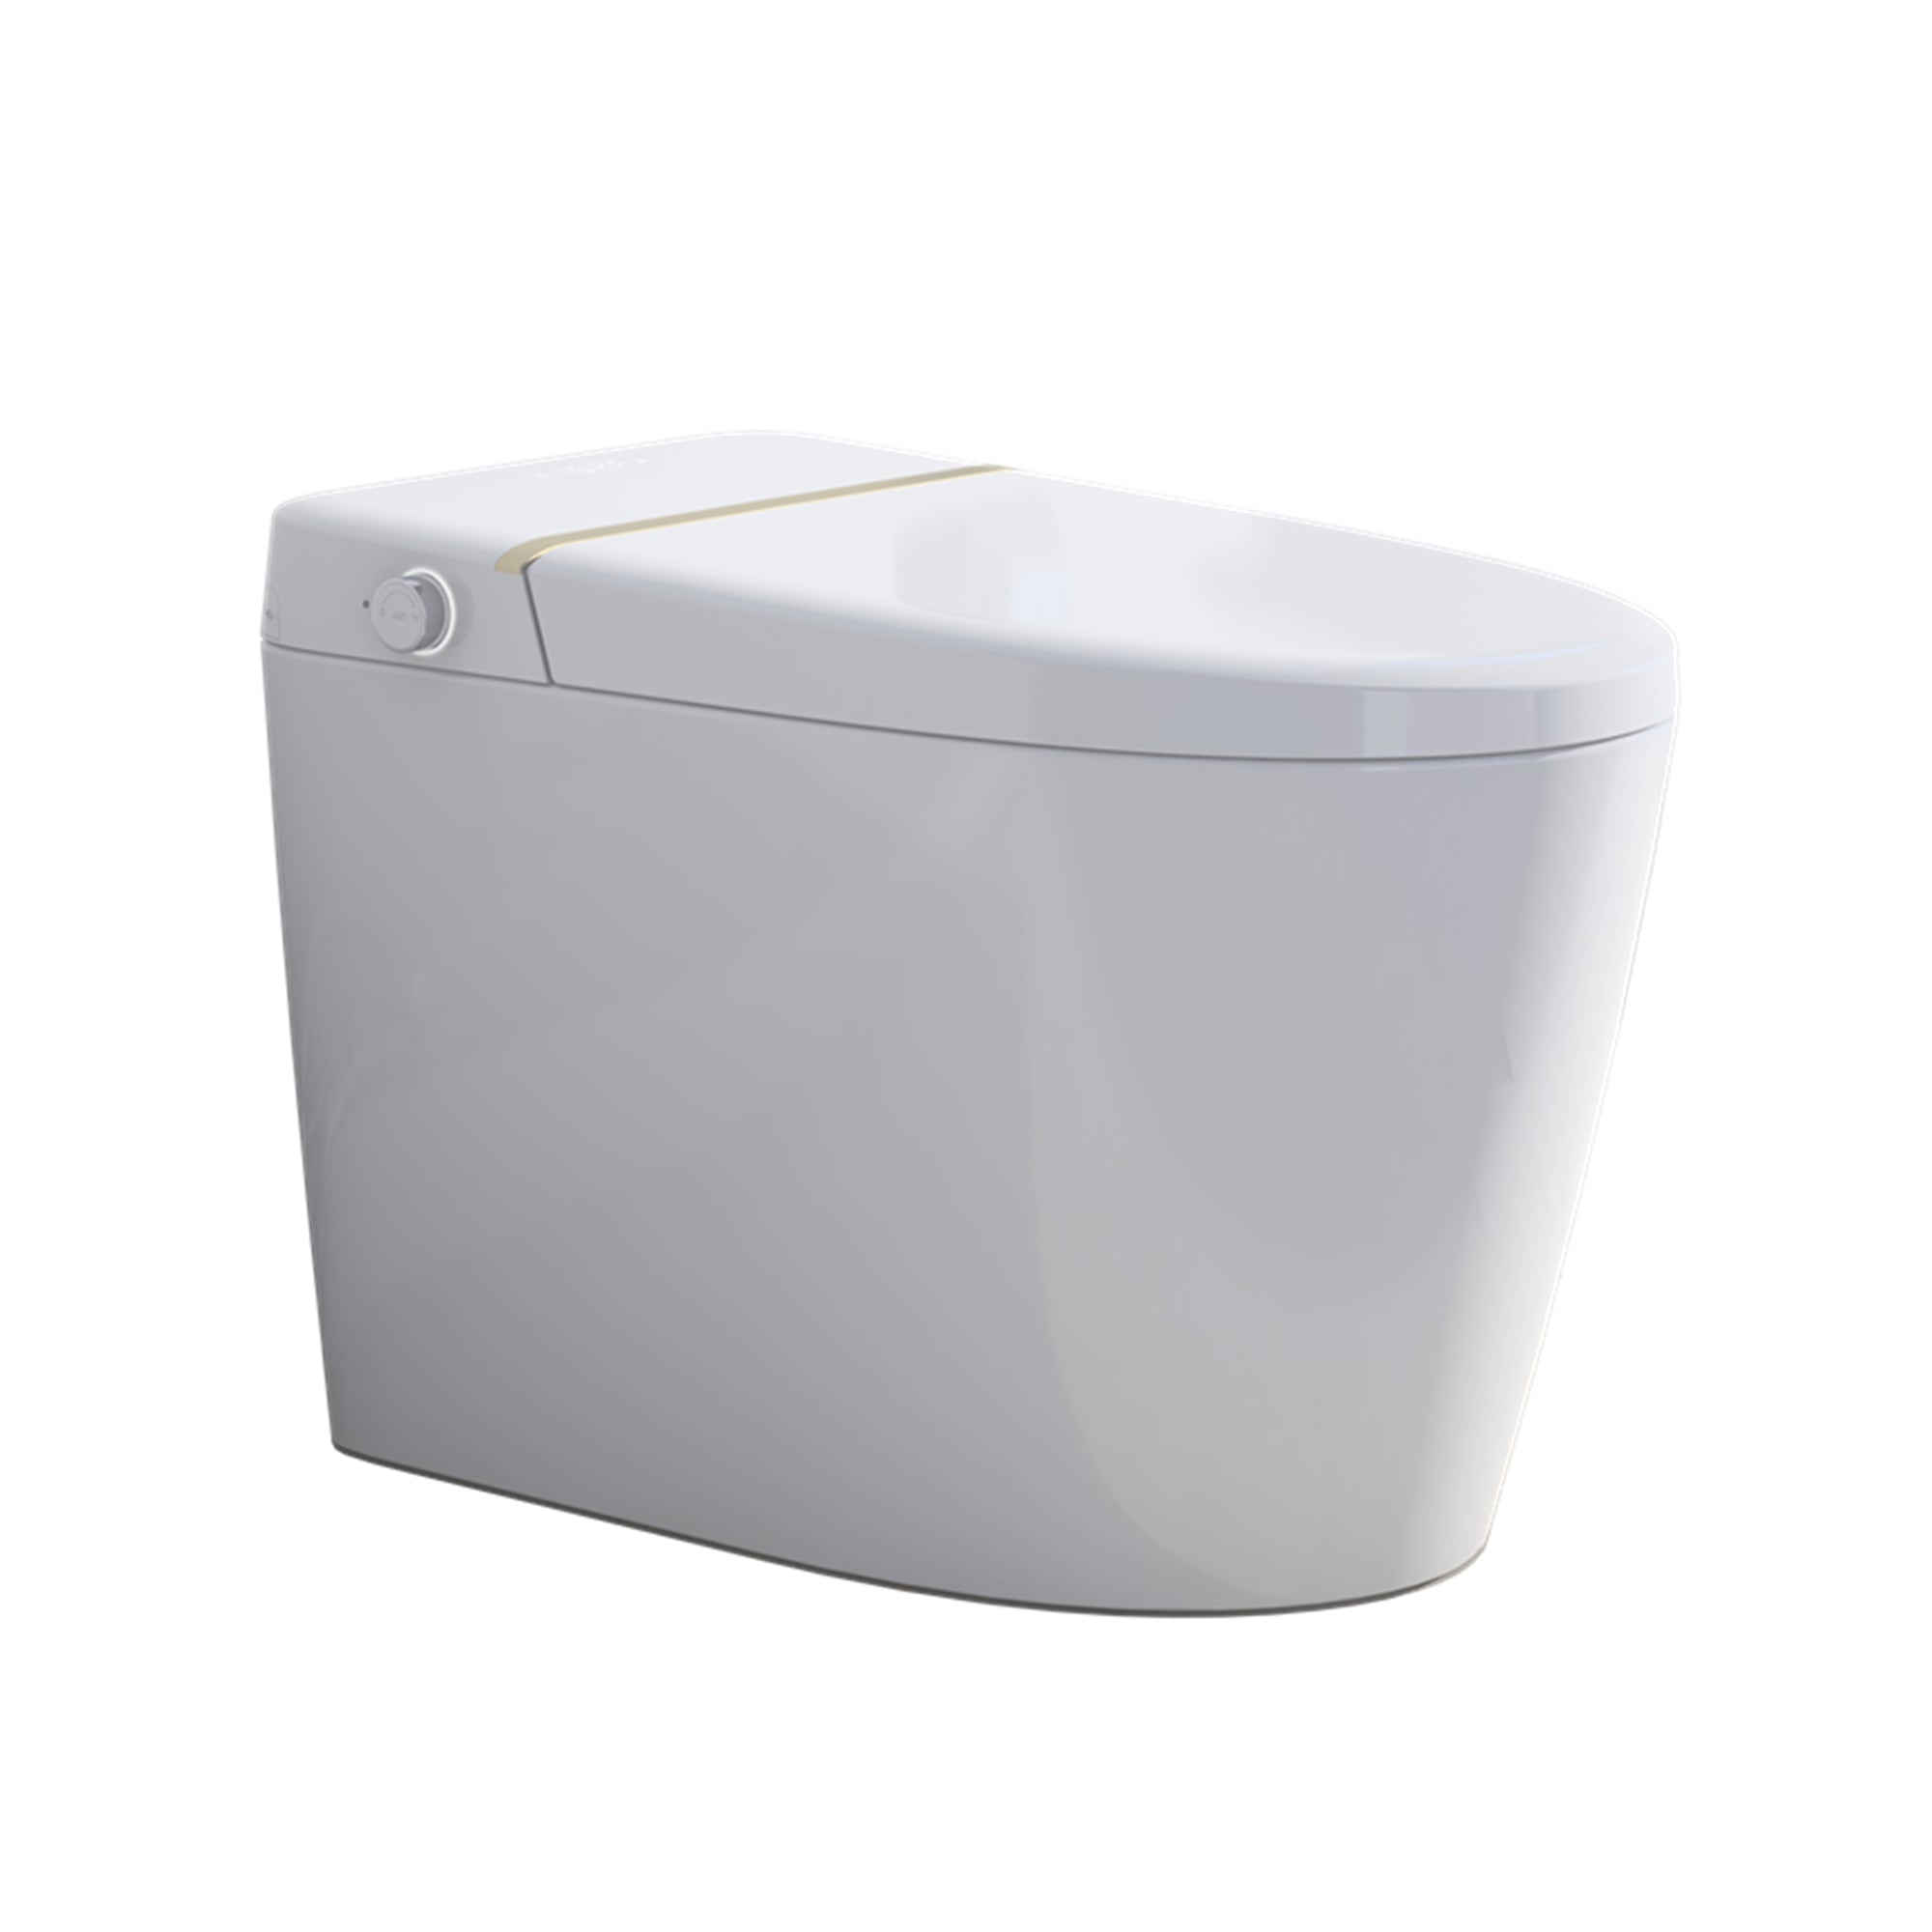 Smart Toilet With Auto Flush,Heated Seat,Warm Water,Warm Air Drying,LED Temperature Display